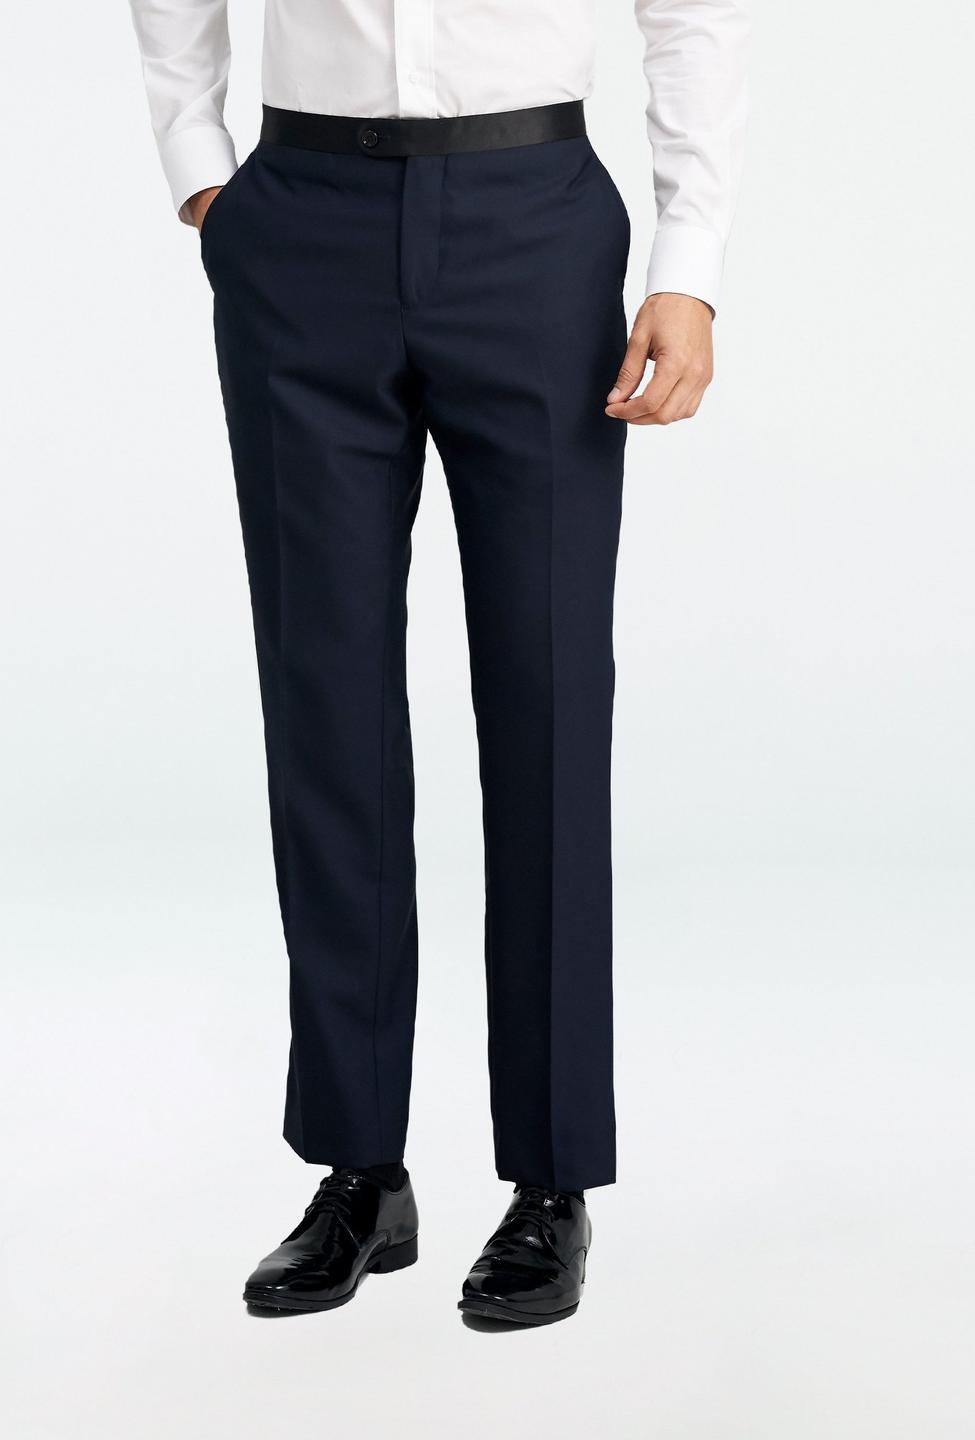 Blue pants - Hampton Solid Design from Tuxedo Indochino Collection